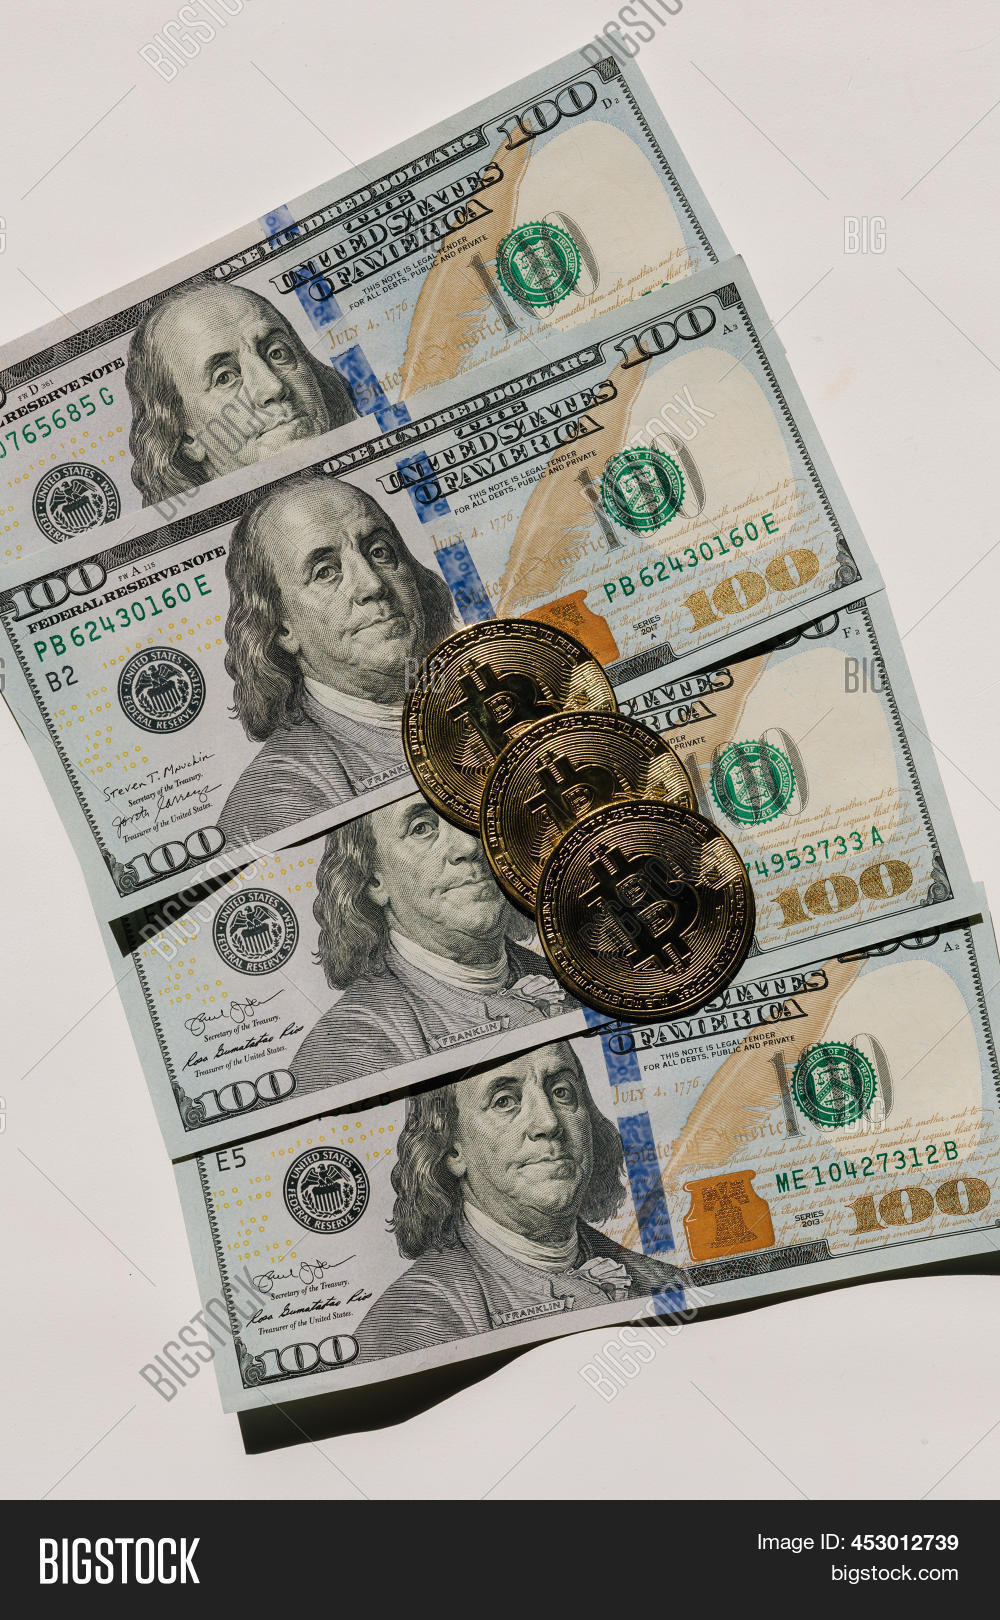 Convert 4 US Dollar (USD) to Bitcoin (BTC), Currency Exchange Rates Today